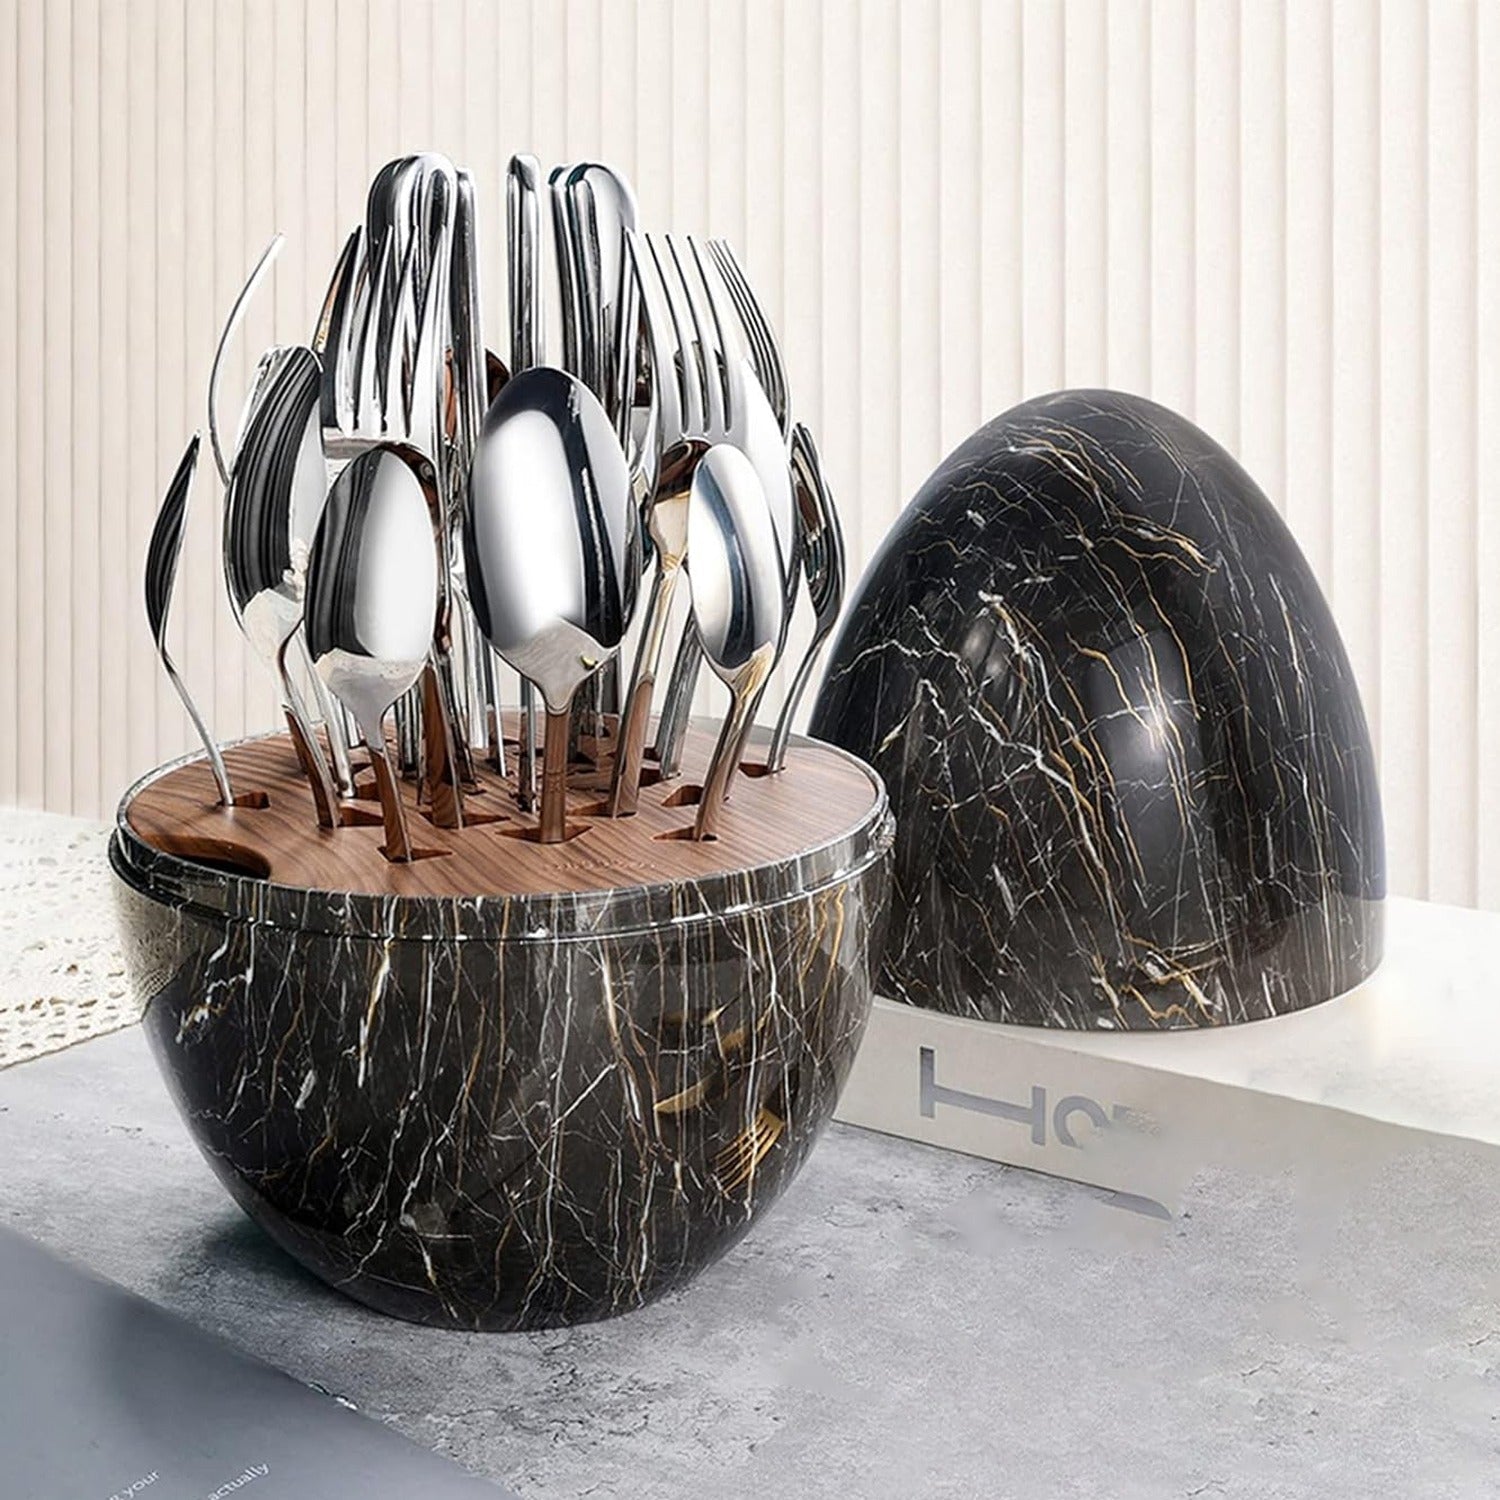 Egg-Shaped Cutlery Organizer with Storage, Mirror Polished Stainless Steel 24-Piece Cutlery Set